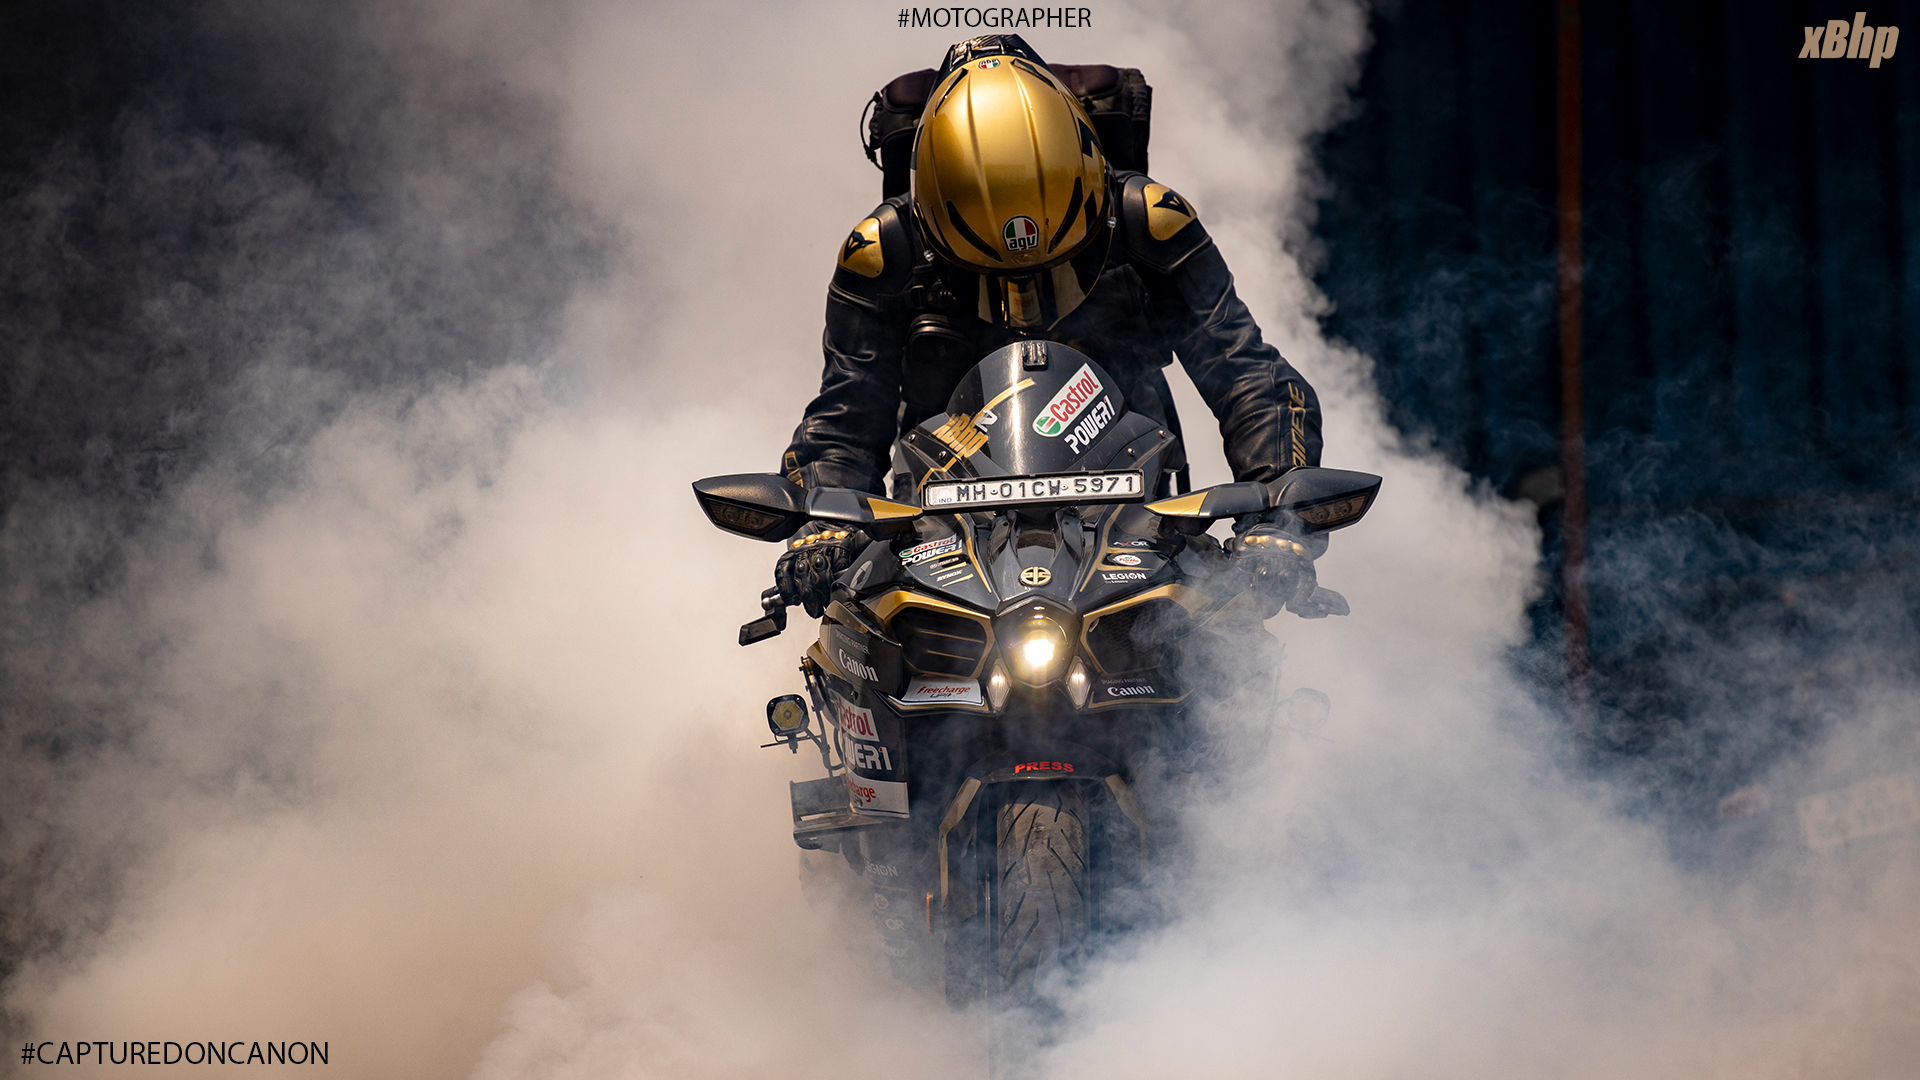 Motocycle Burnout Wallpapers